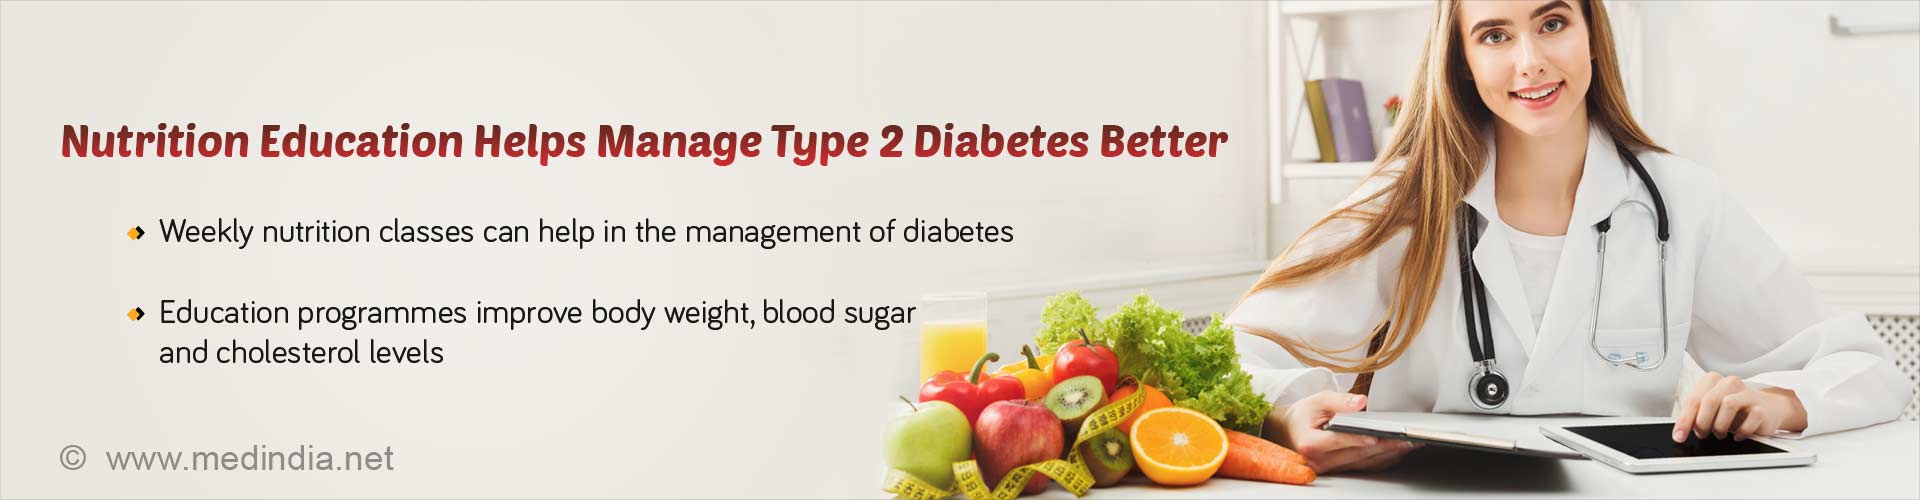 nutrition education helps manage type 2 diabetes better
- weekly nutrition classes can help in the management of diabetes
- education programmes improve body weight, blood sugar and cholesterol levels